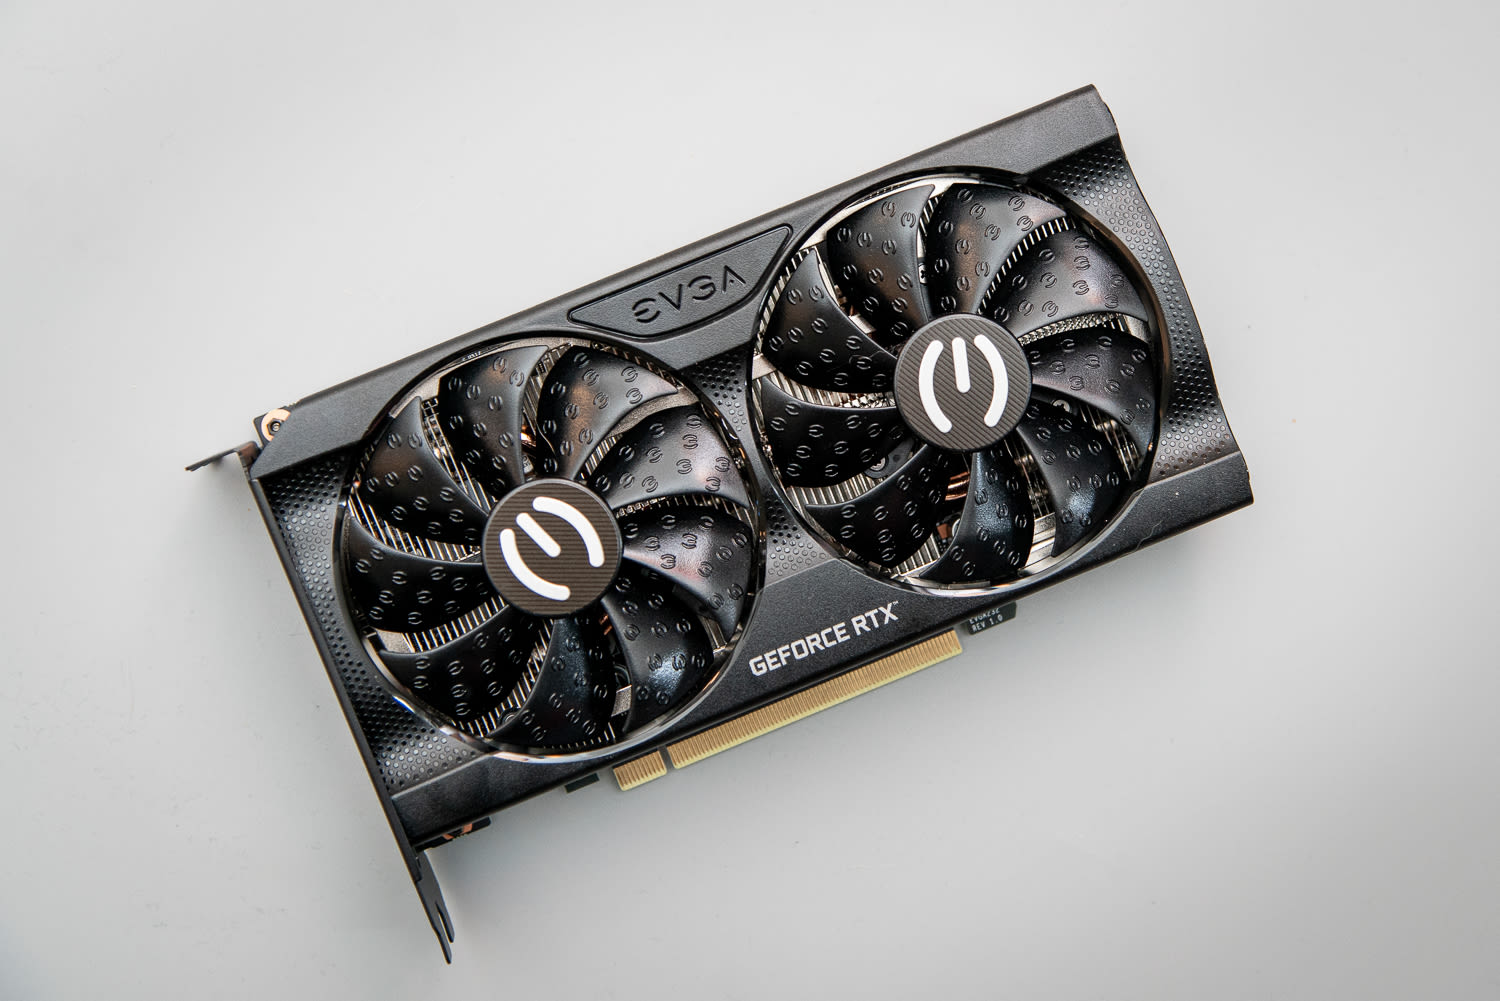 Nvidia may be working on a surprising new budget GPU